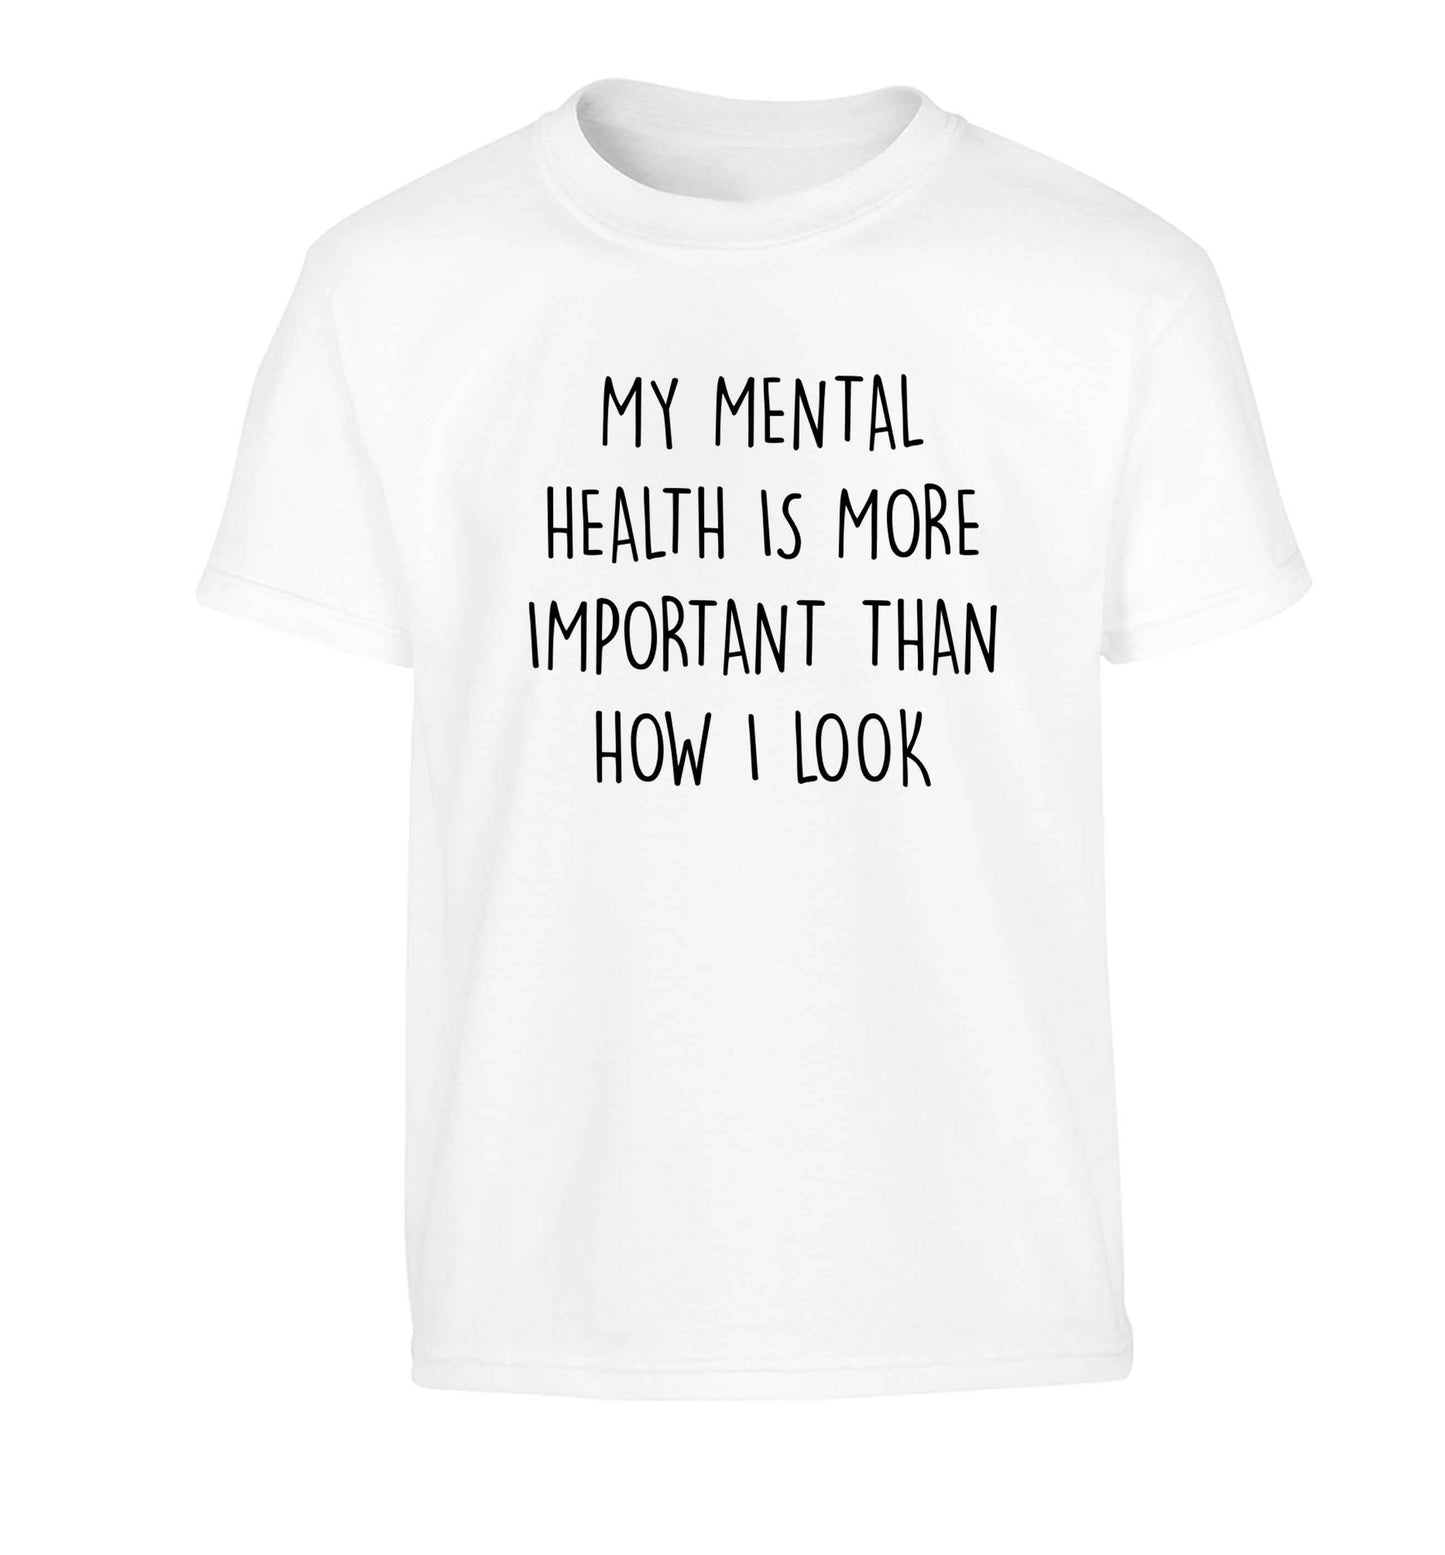 My mental health is more importnat than how I look Children's white Tshirt 12-13 Years